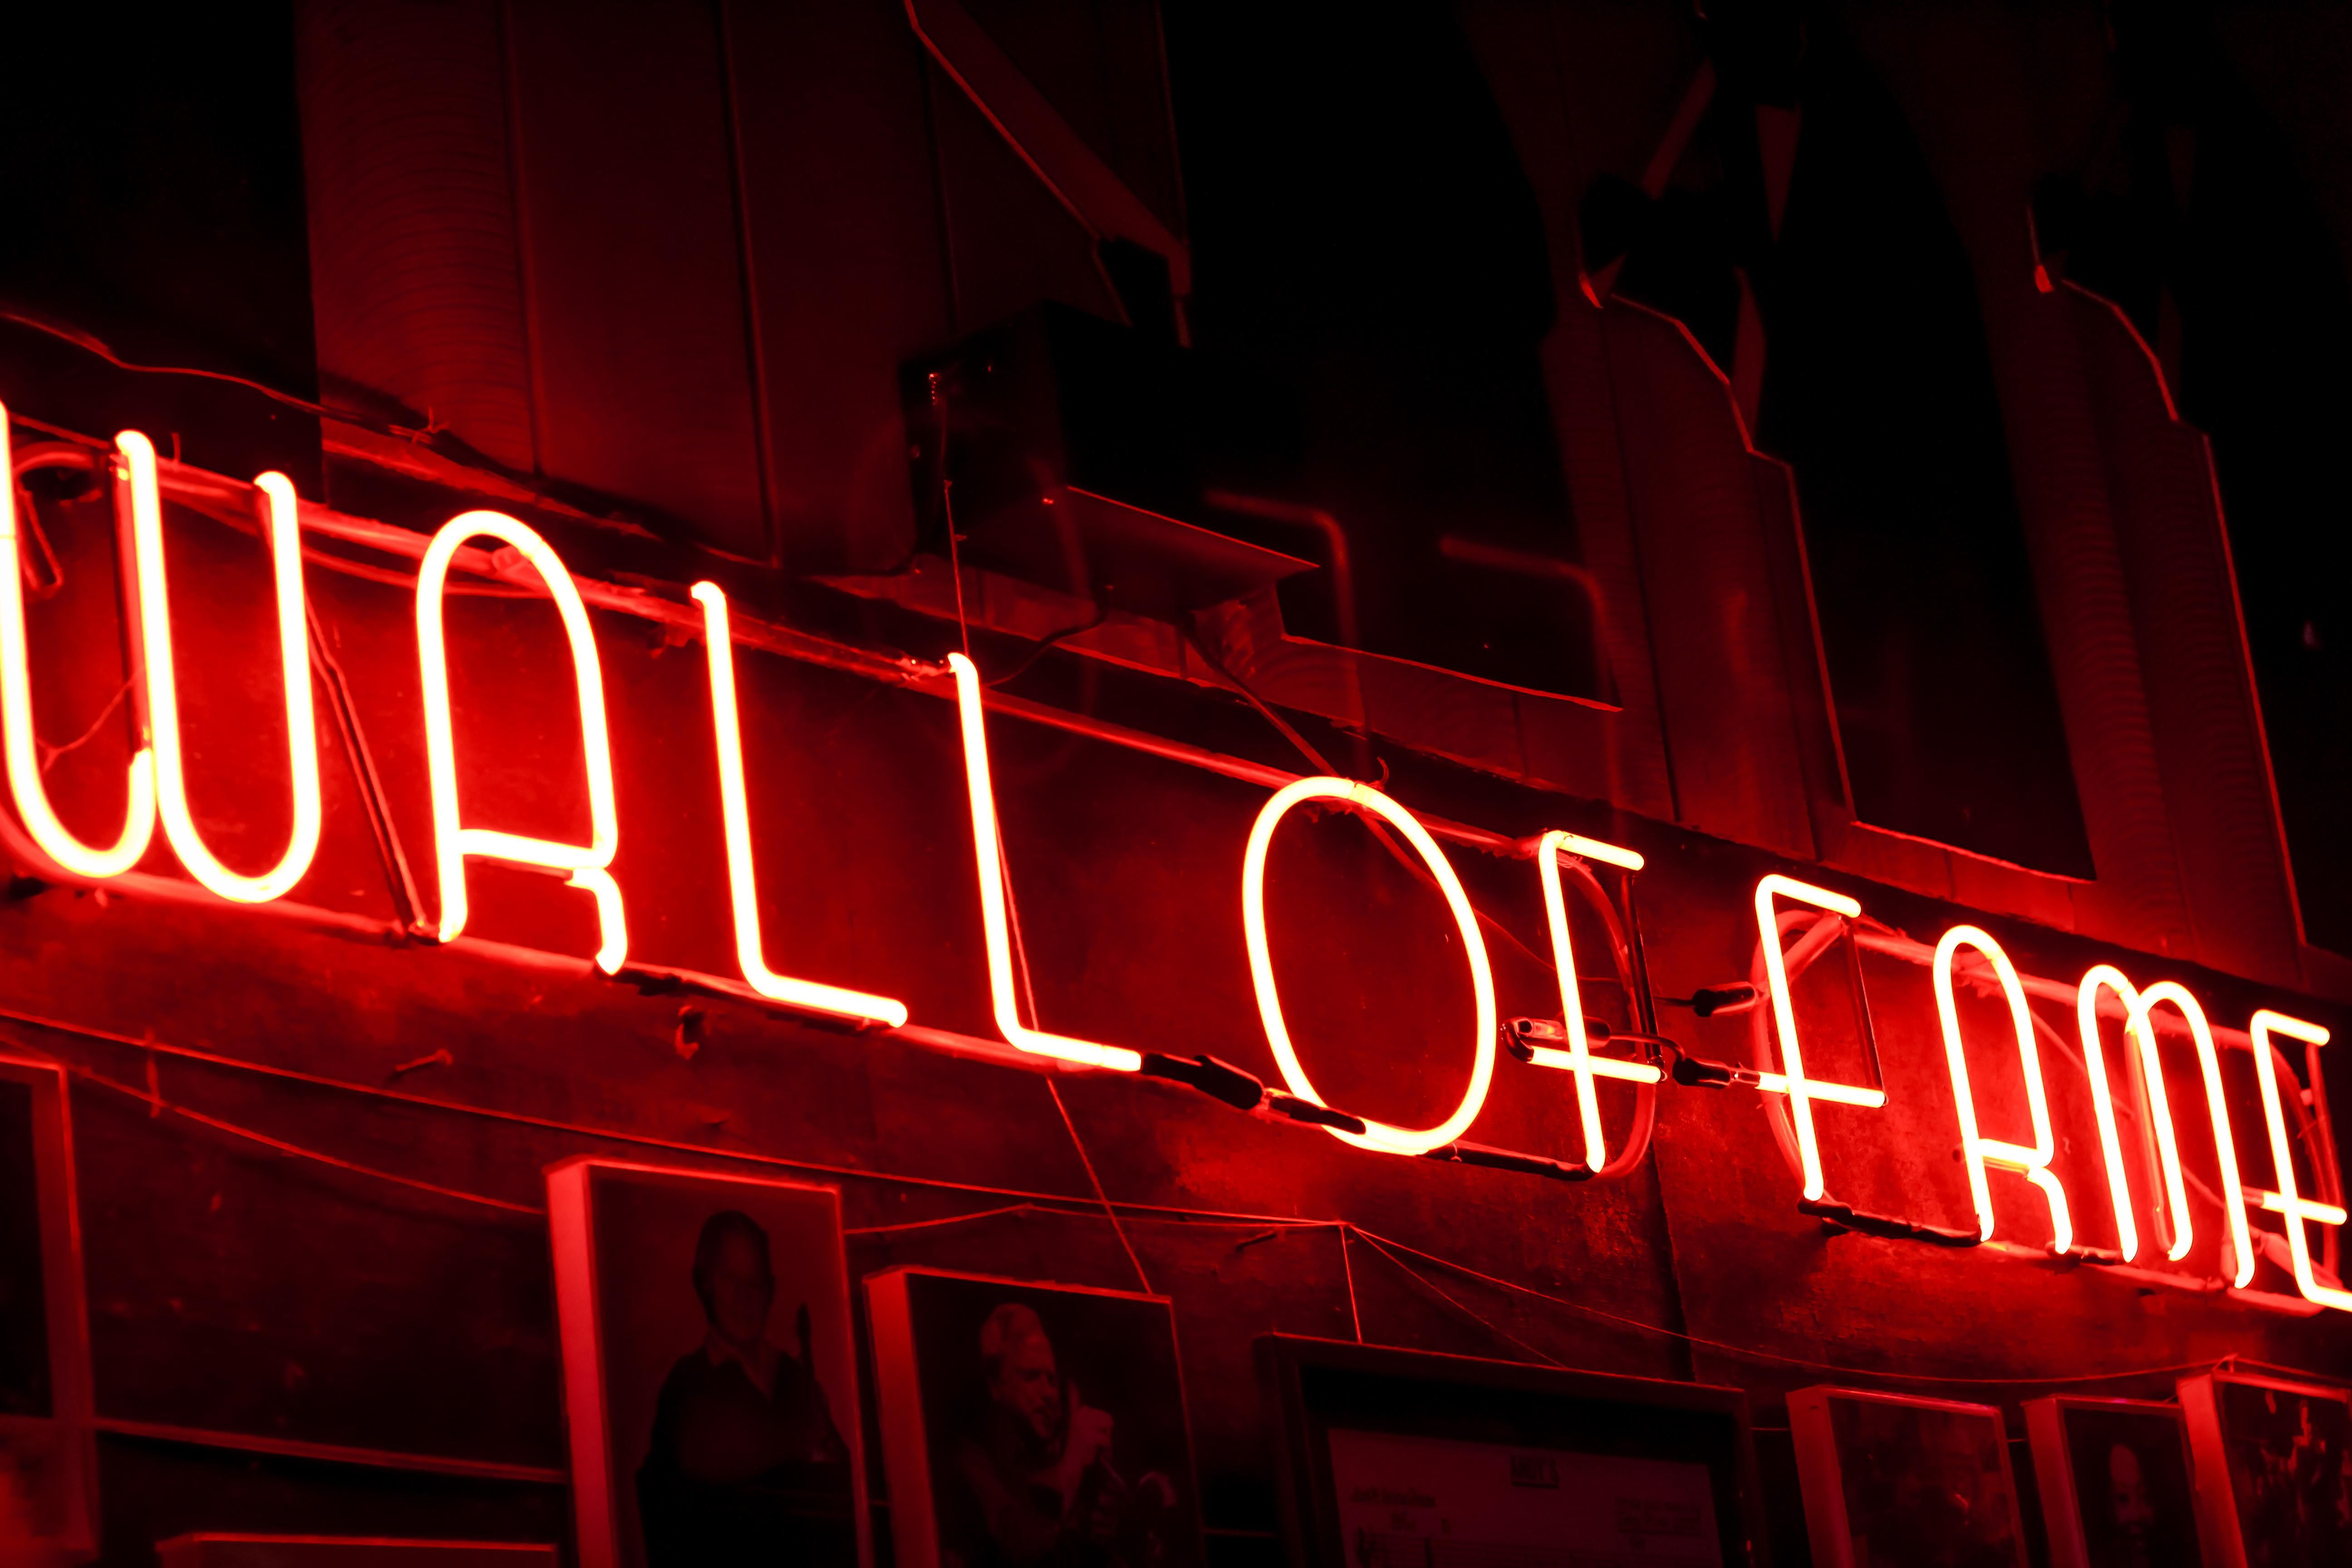 A red neon sign for the Wall of Fame. - Neon red, YouTube